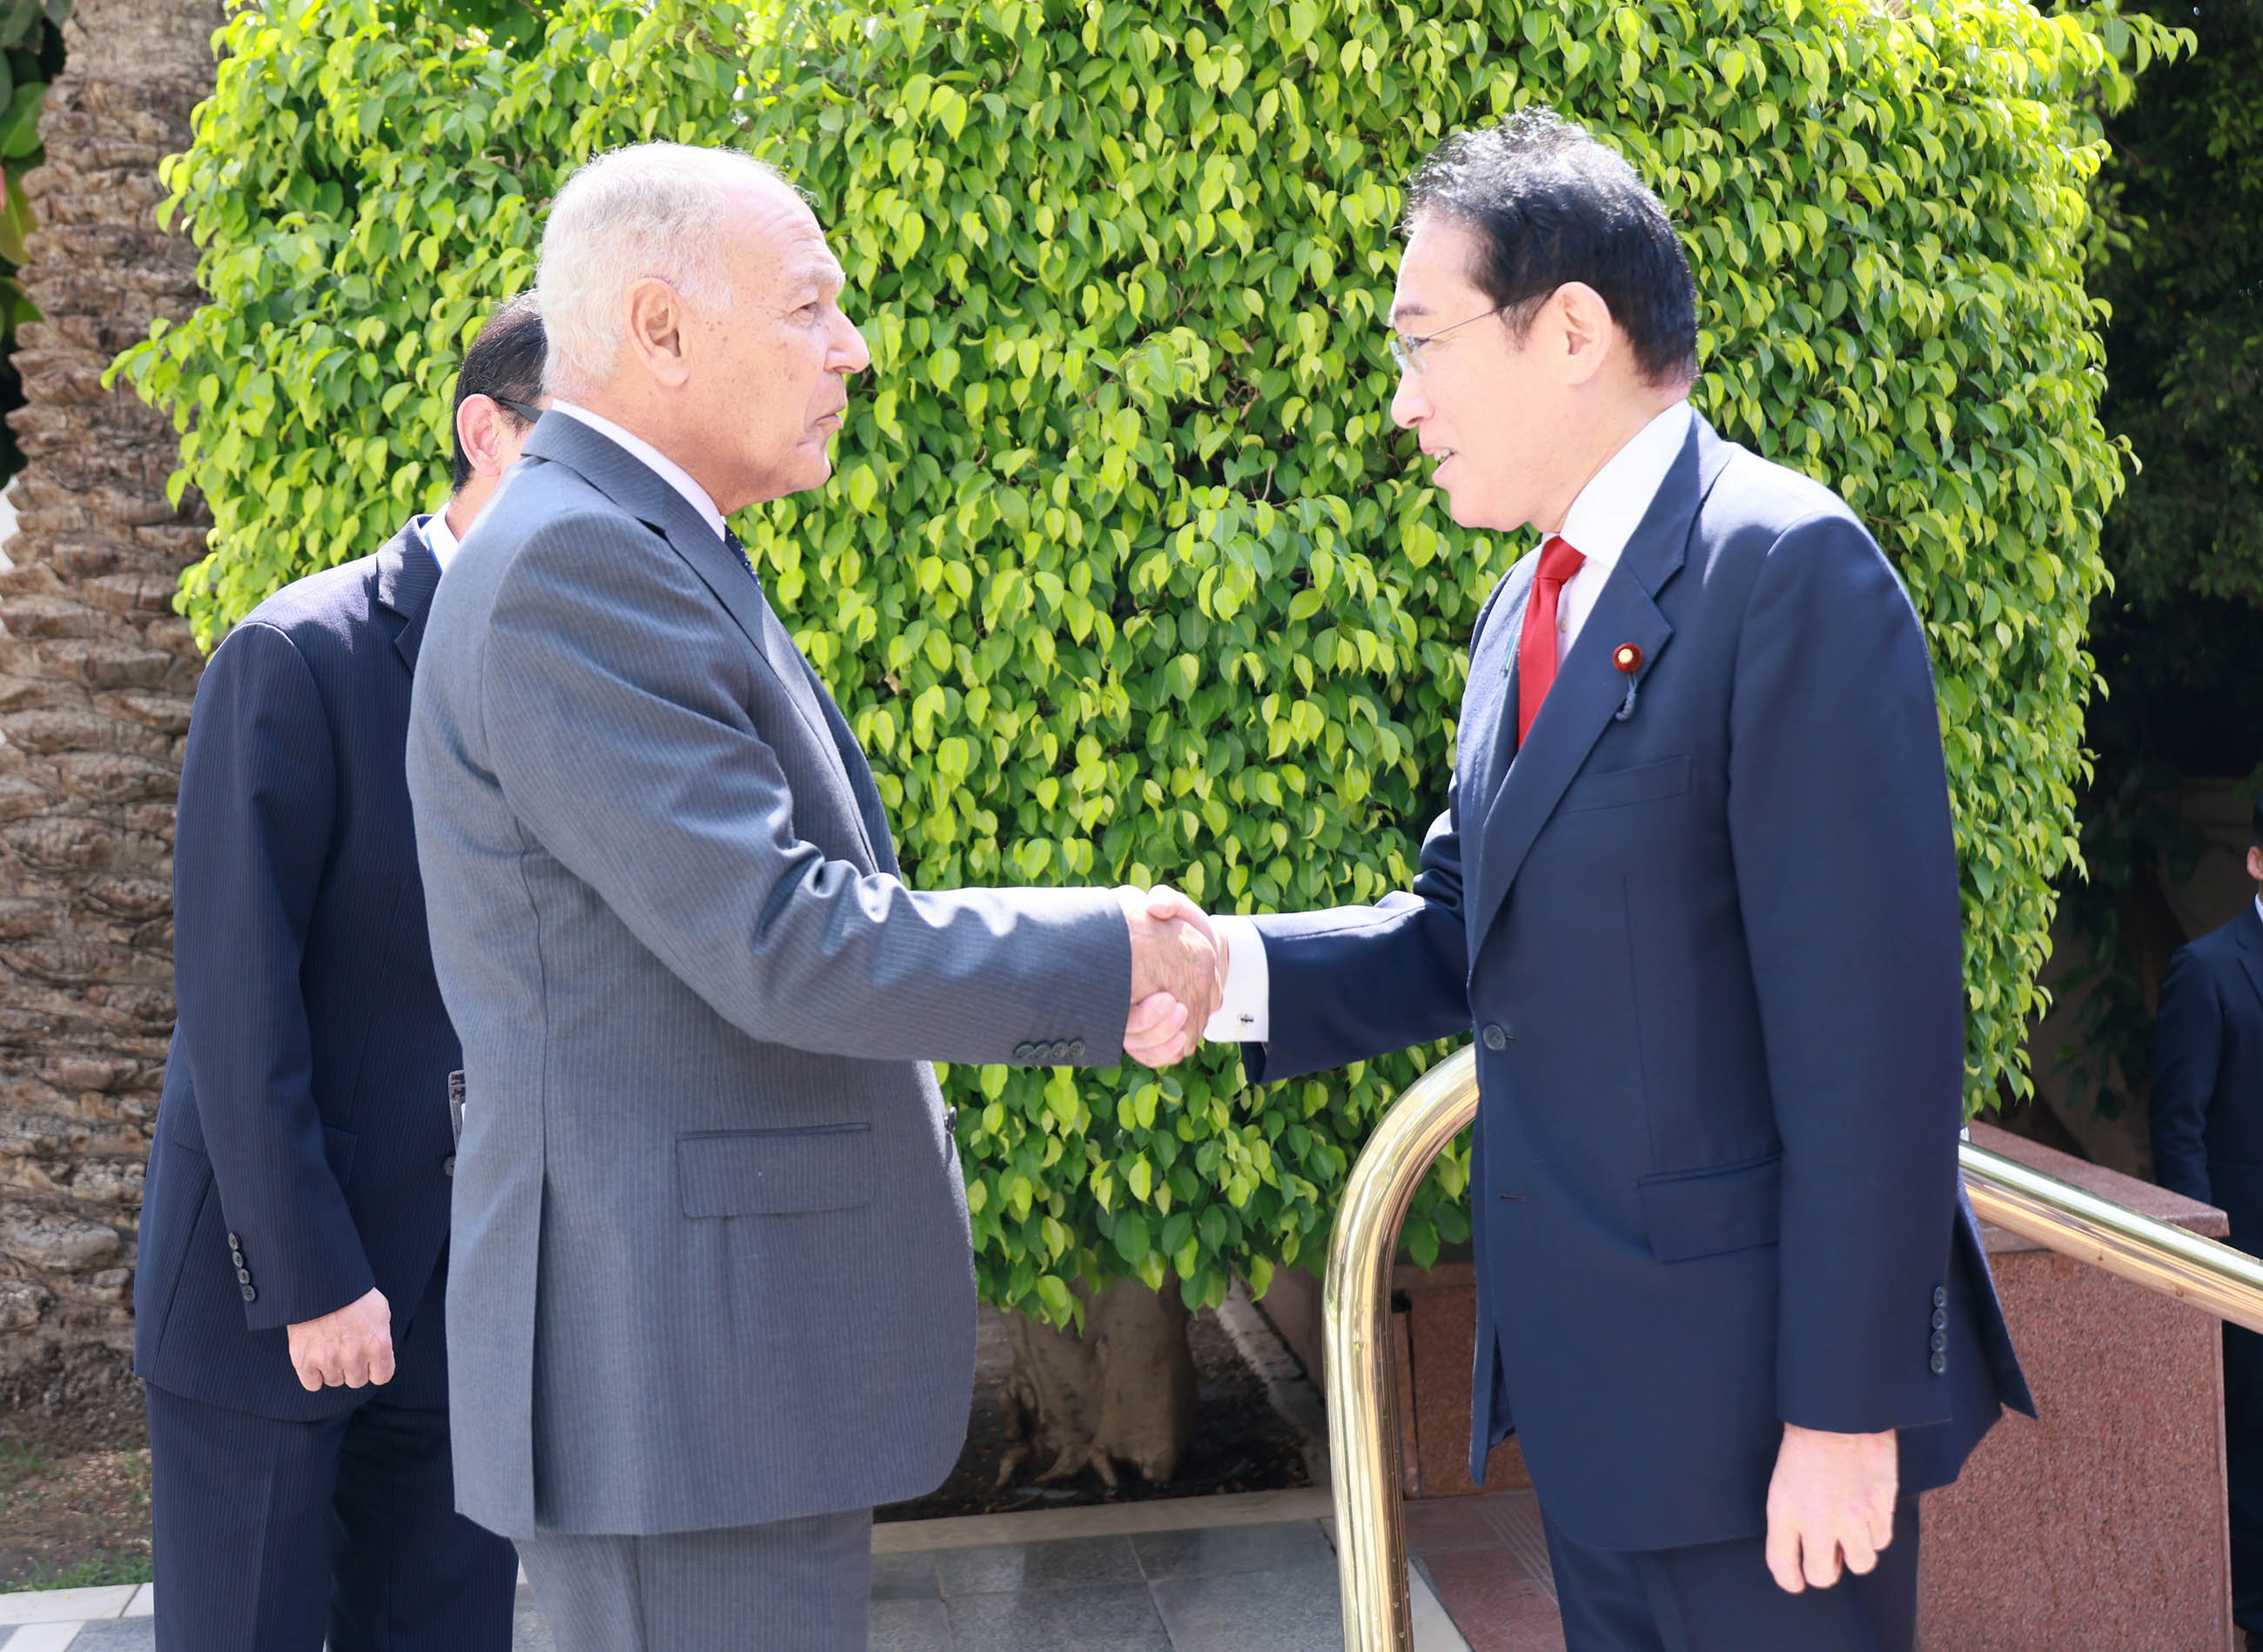 Prime Minister Kishida receiving a courtesy call from Secretary General Aboul Gheit of the League of Arab States